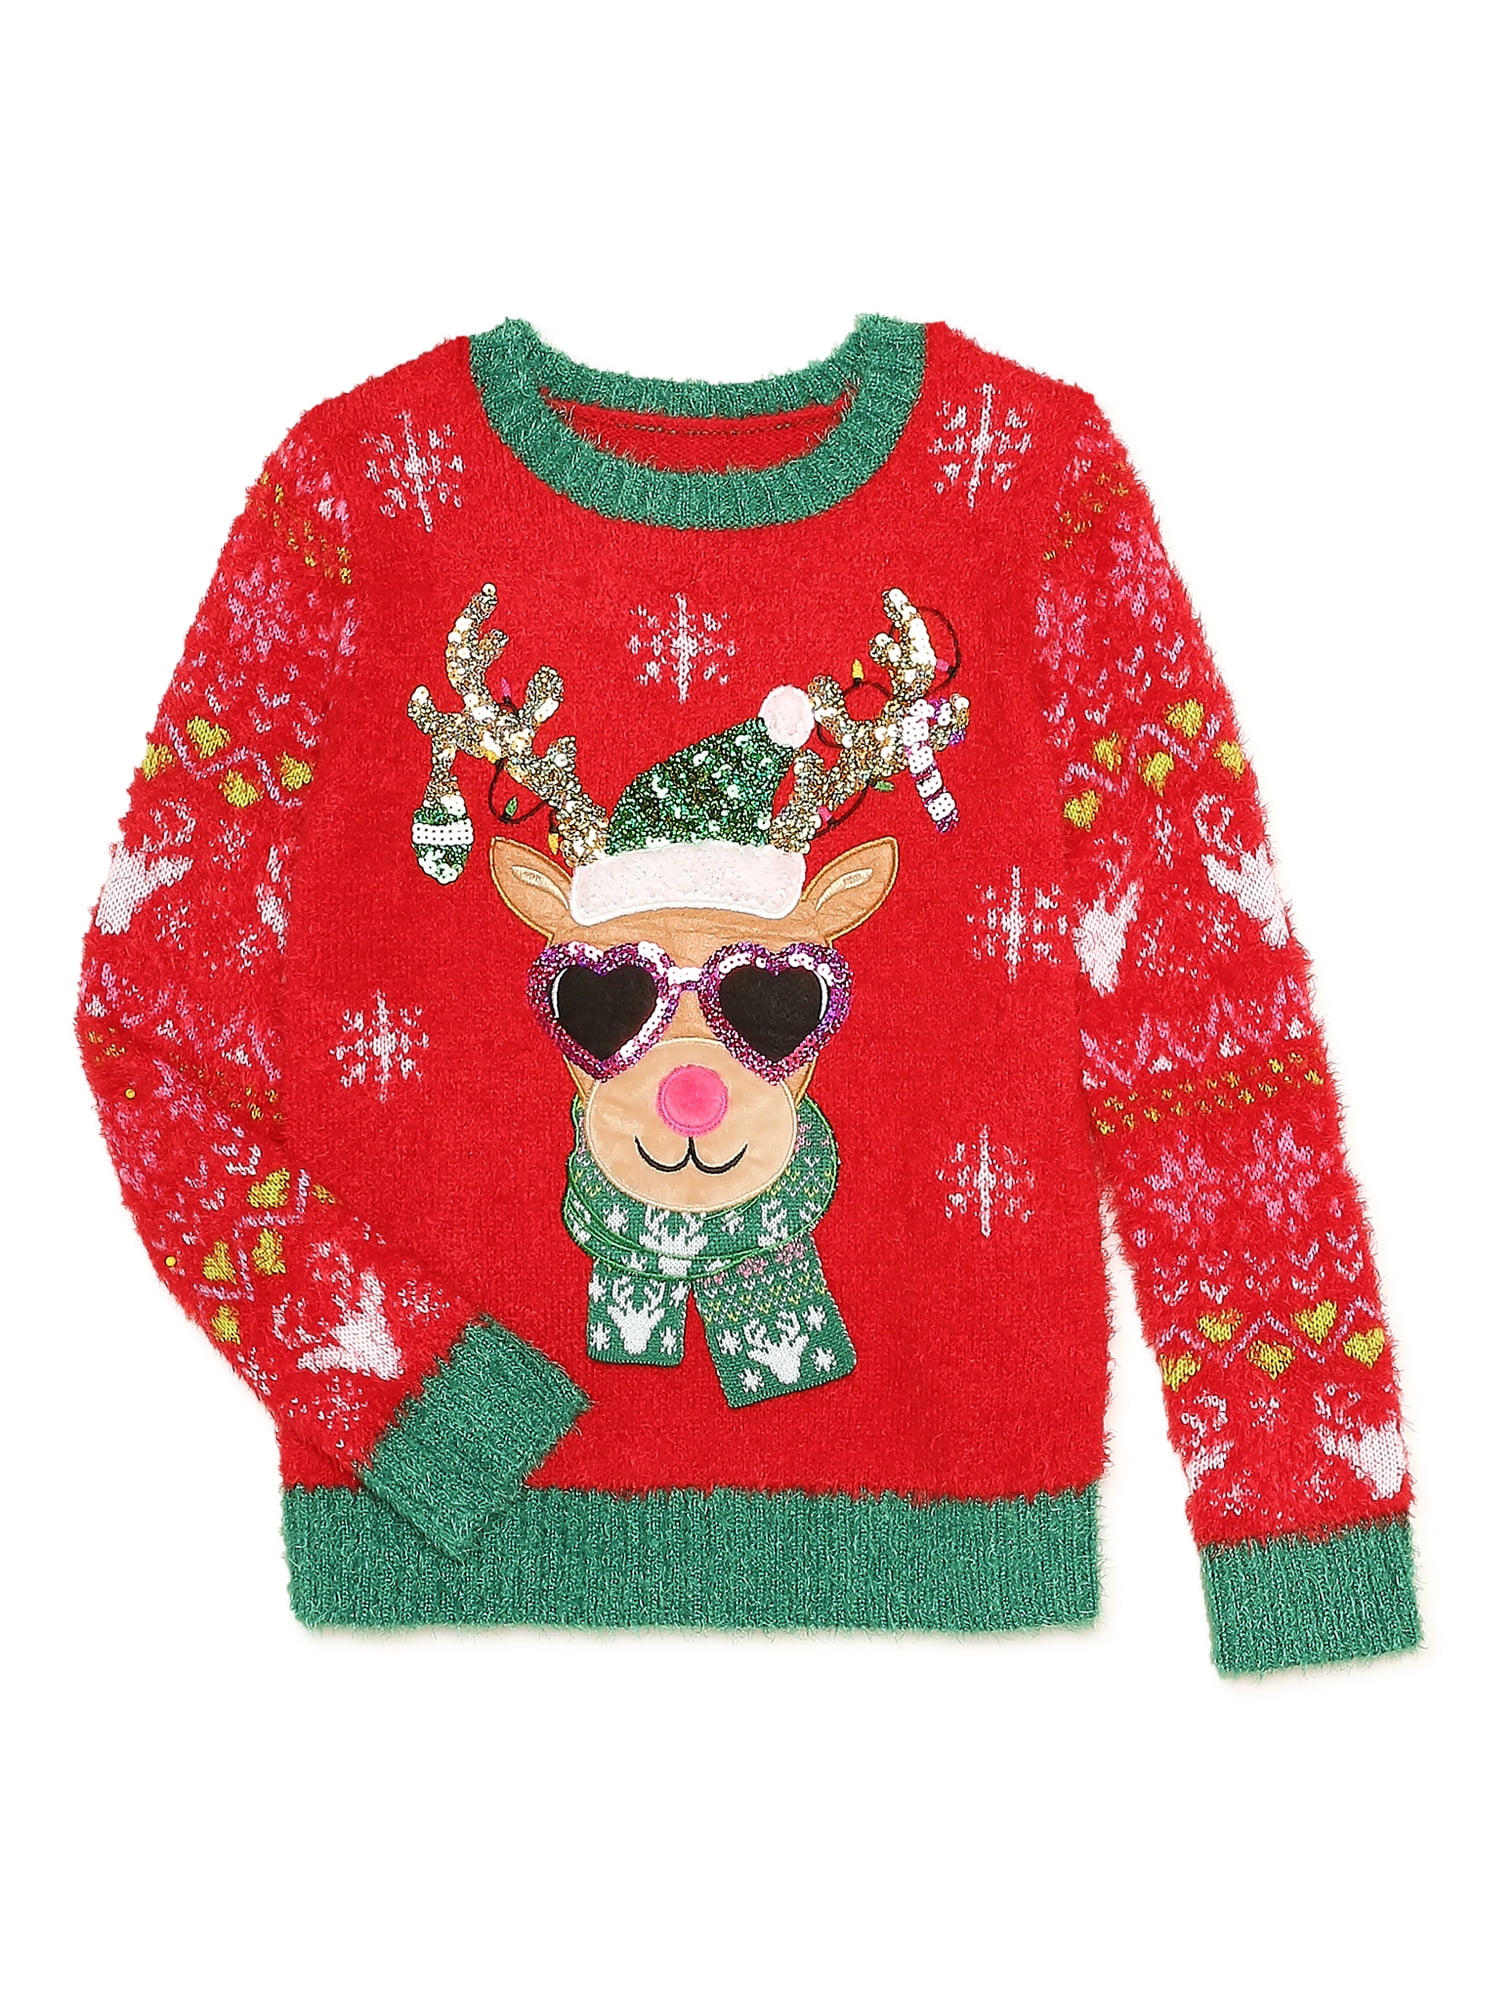 Holiday Time Girls Christmas Sweater, Sizes 4-18 & Plus